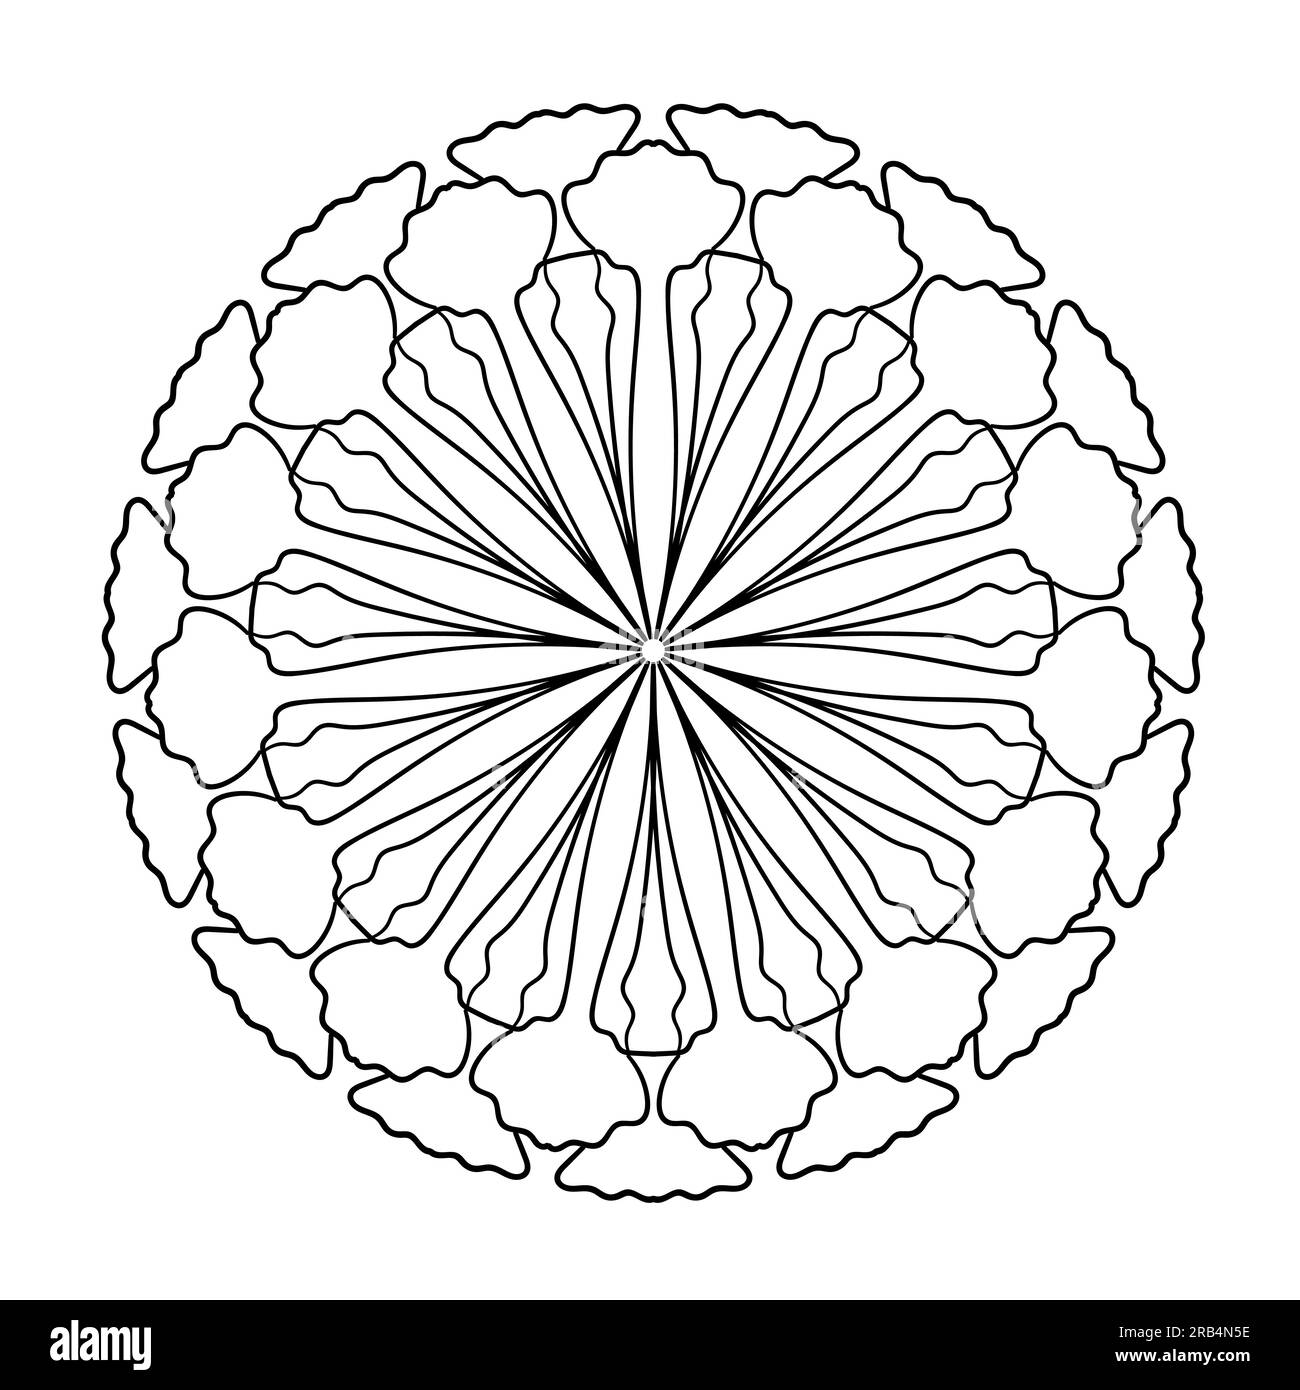 Mandala ornament. Coloring book page. T-shirt, greeting card, stickers, tattoos, decorations for interior design. Vectorillustration on white backgrou Stock Vector